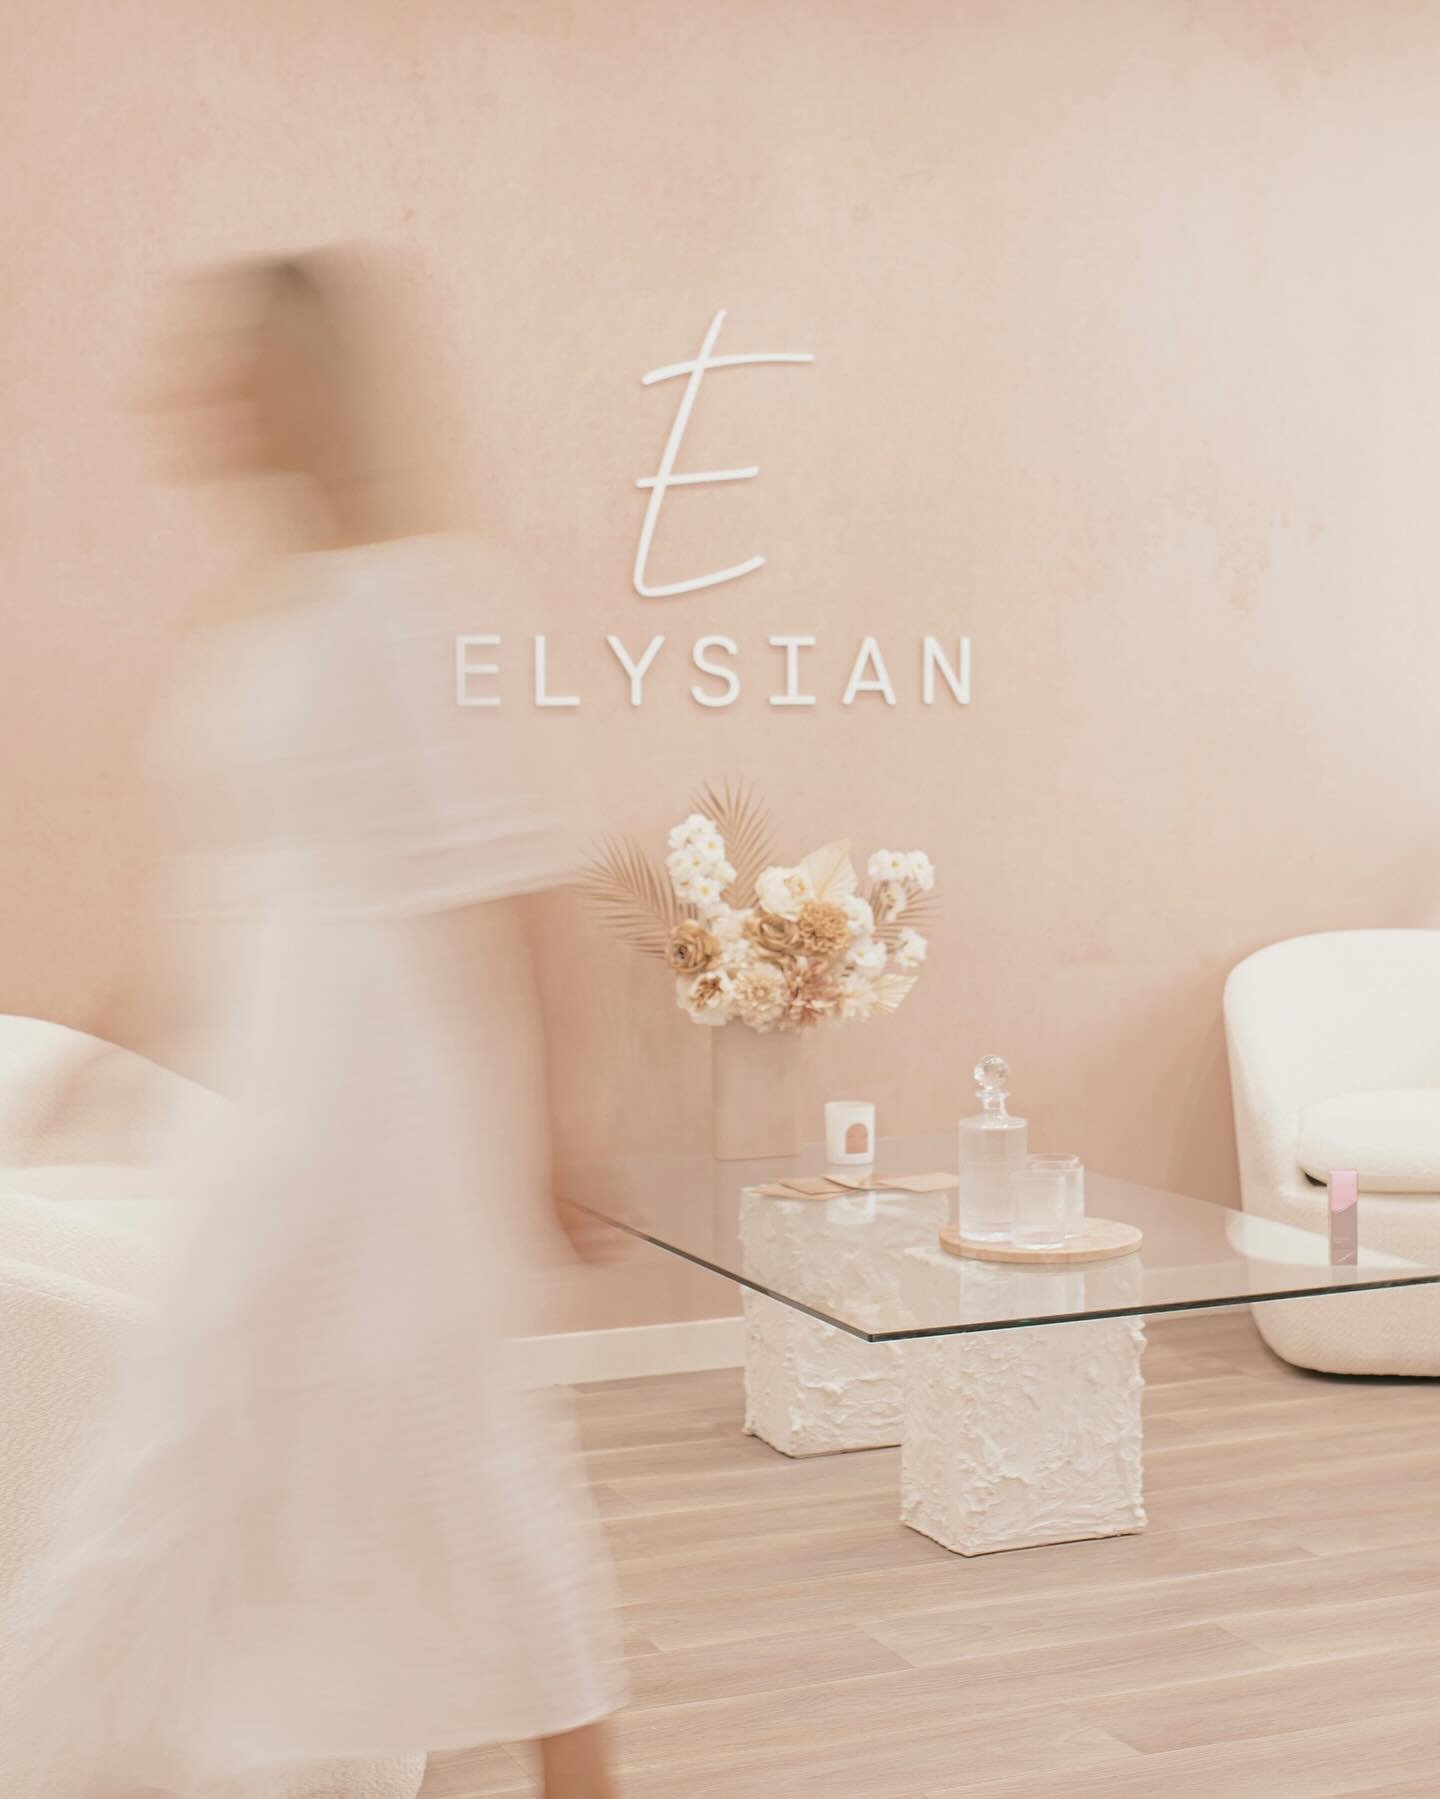 @elysianbeautyandwellness 

This salon is unmatched, and Launceston&rsquo;s most renowned beauty salon! 
From the most luxe products, to personalised skin treatments, to brows, lashes and nails. 💅🏼
Think the salon is beautiful? Wait until you meet 